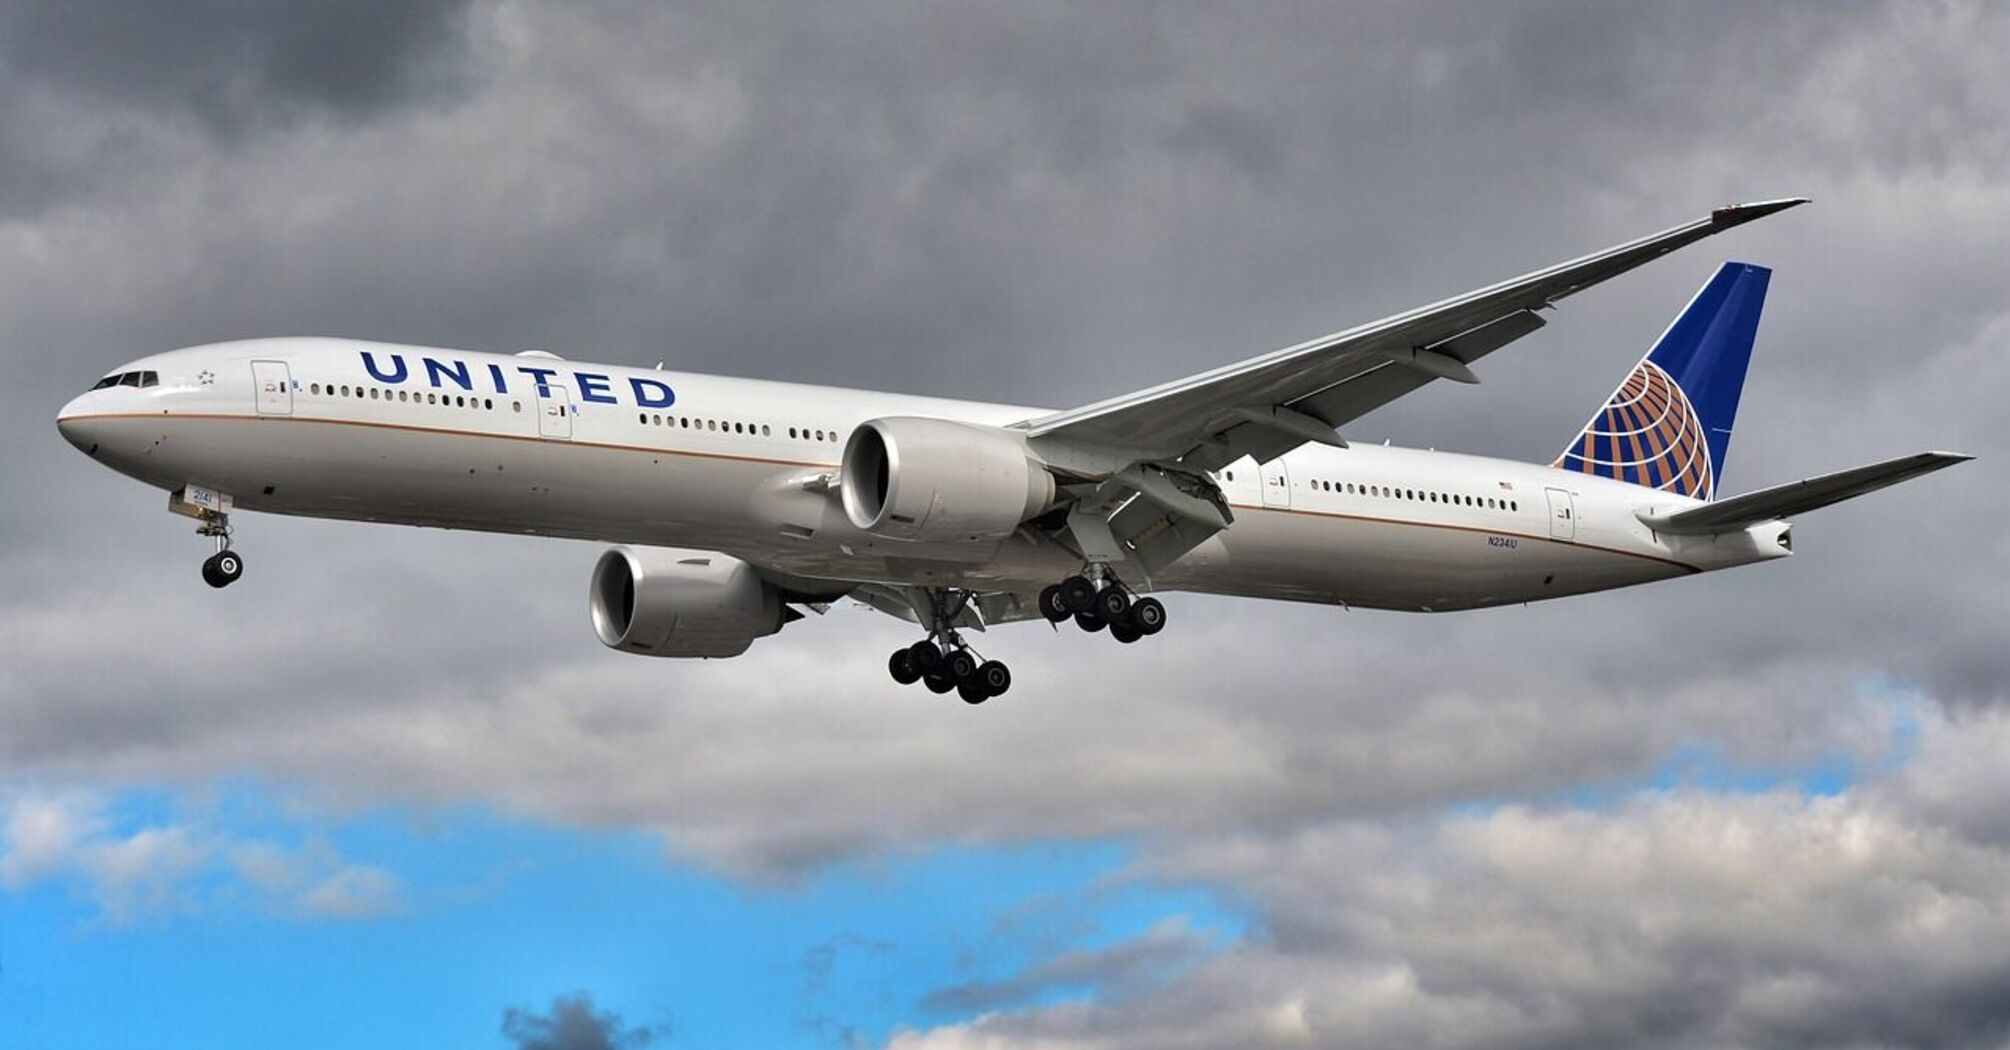 During a United flight, an unknown person wrote a bomb threat on the plane's window: the flight was immediately interrupted